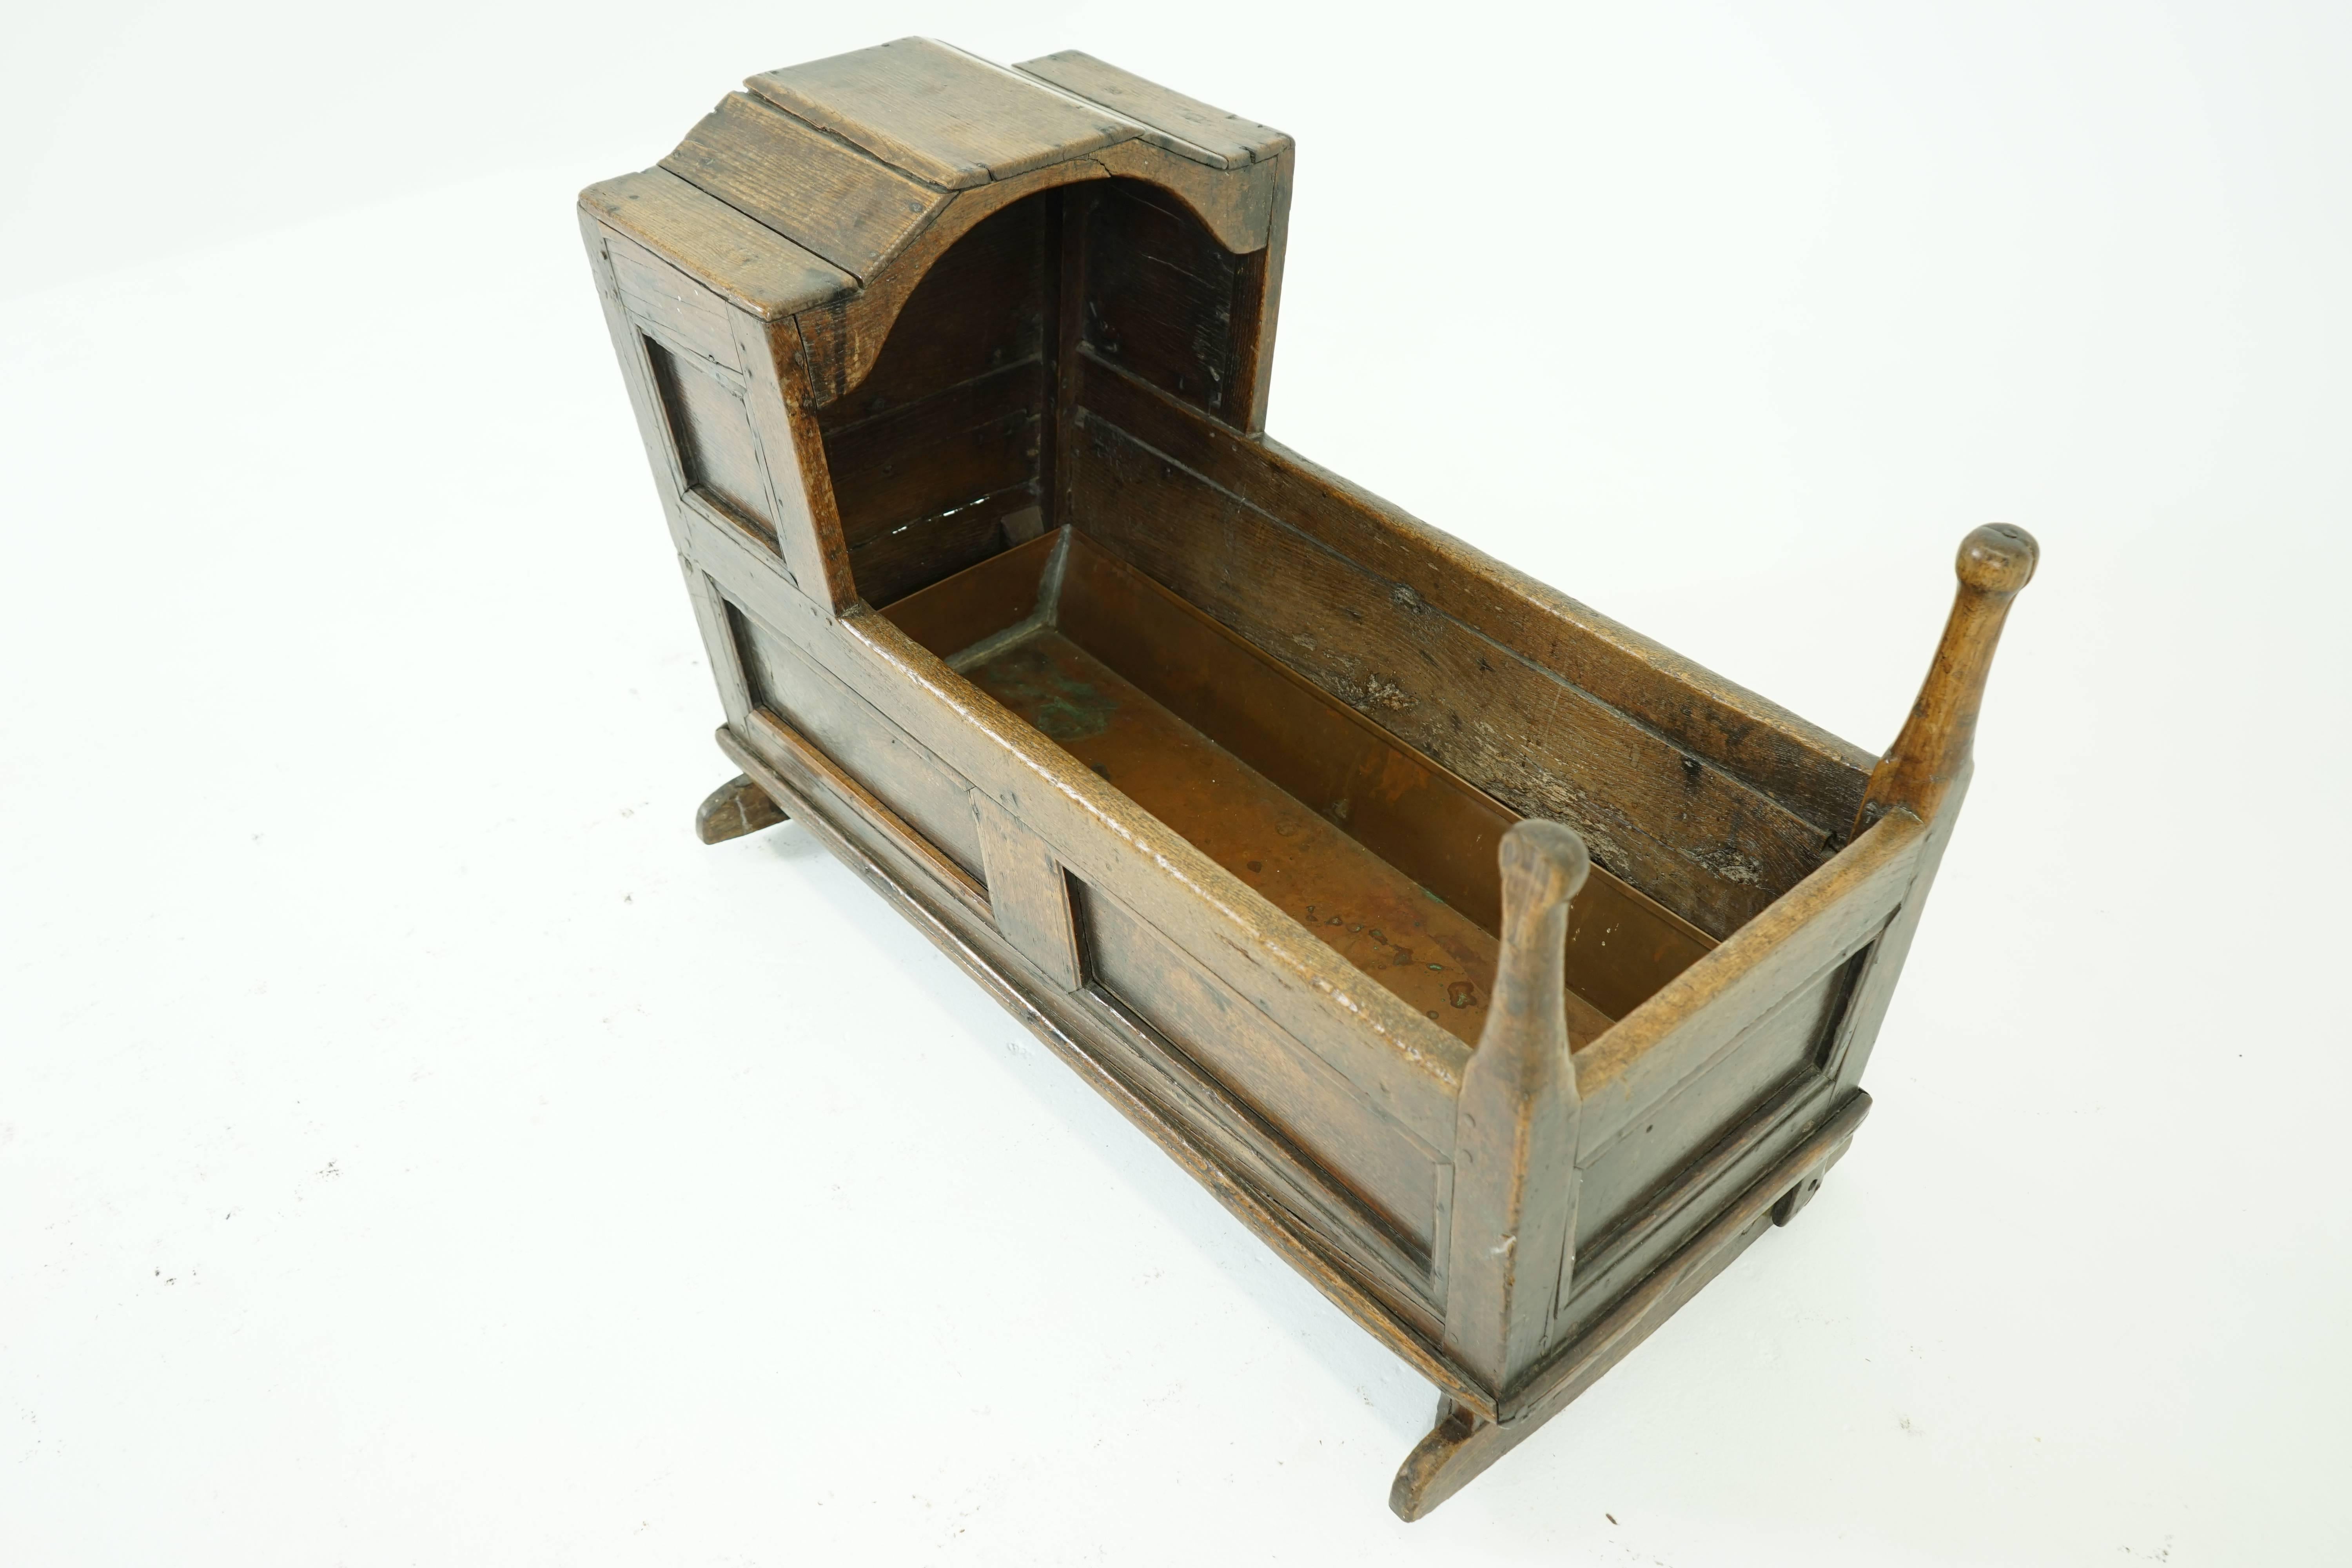 Antique cradle wooden cradle babys bed, Scotland, 1750 B780

Scotland, 1750
All original finish
Shaped hood above
Paneled sides
Turned finials to rock the cradle back and forth
Original rockers and floor boards

$1250

B780
Measures: 38